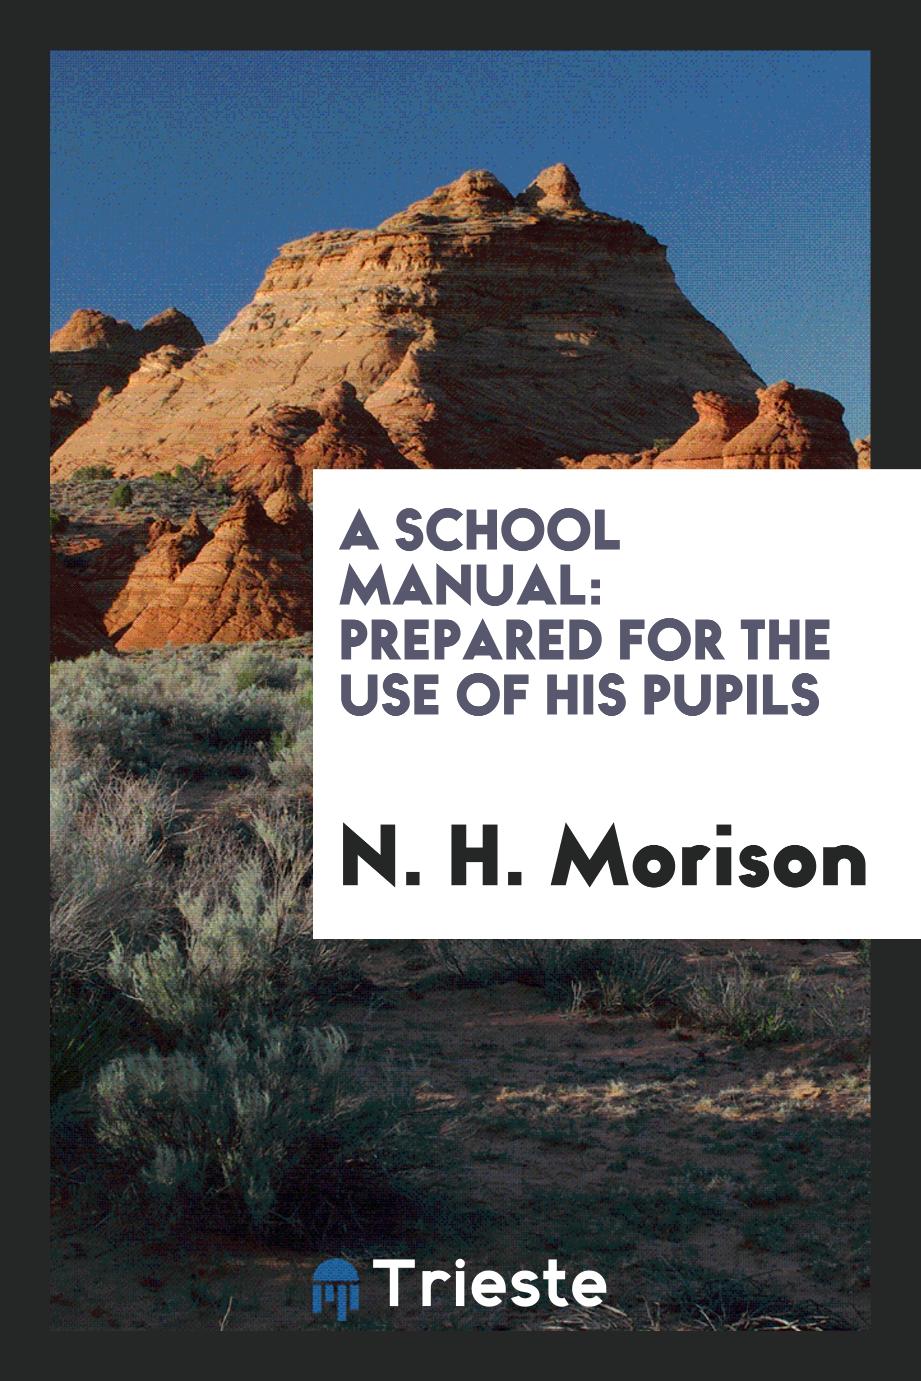 A School Manual: Prepared for the Use of His Pupils